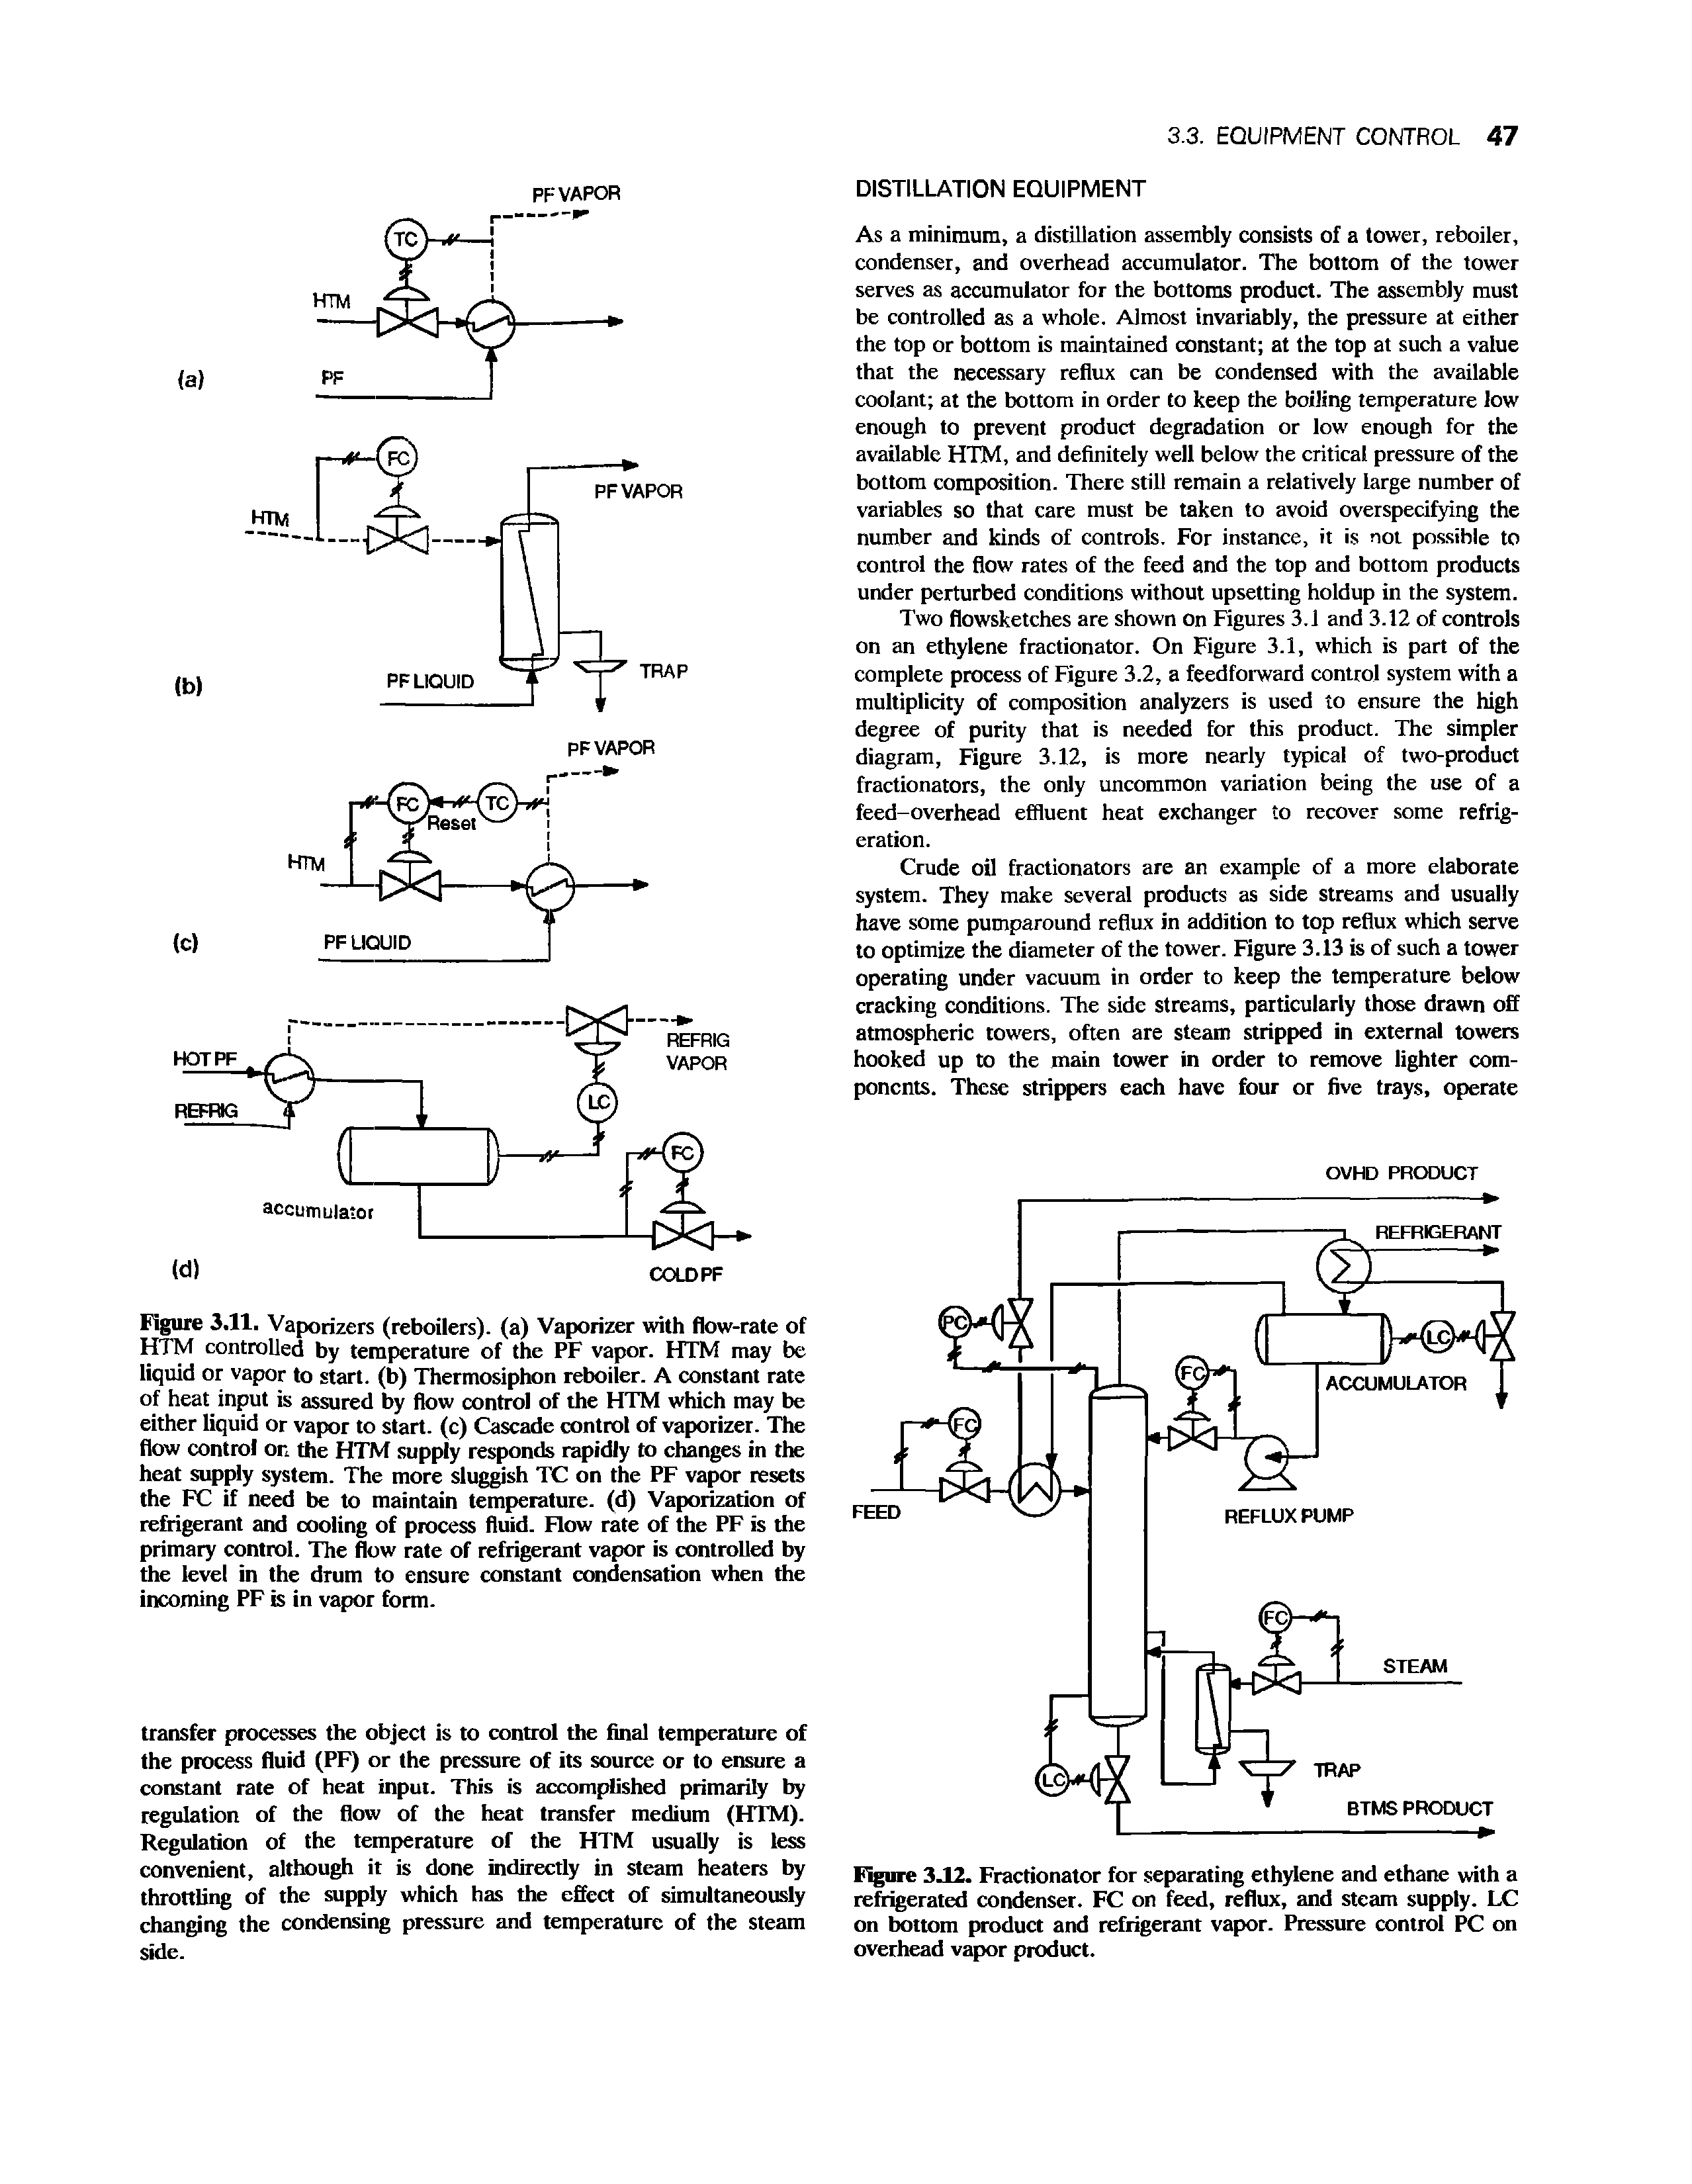 Figure 3.11. Vaporizers (reboilers), (a) Vaporizer with flow-rate of HTM controlled by temperature of the PF vapor. HTM may be liquid or vapor to start, (b) Thermosiphon reboiler. A constant rate of heat input is assured by flow control of the HTM which may be either liquid or vapor to start, (c) Cascade control of vaporizer. The flow control on the HTM supply responds rapidly to changes in the heat supply system. The more sluggish TC on the PF vapor resets the FC if need be to maintain temperature, (d) Vaporization of refrigerant and cooling of process fluid. Flow rate of the PF is the primary control. The flow rate of refrigerant vapor is controlled by the level in the drum to ensure constant condensation when the incoming PF is in vapor form.